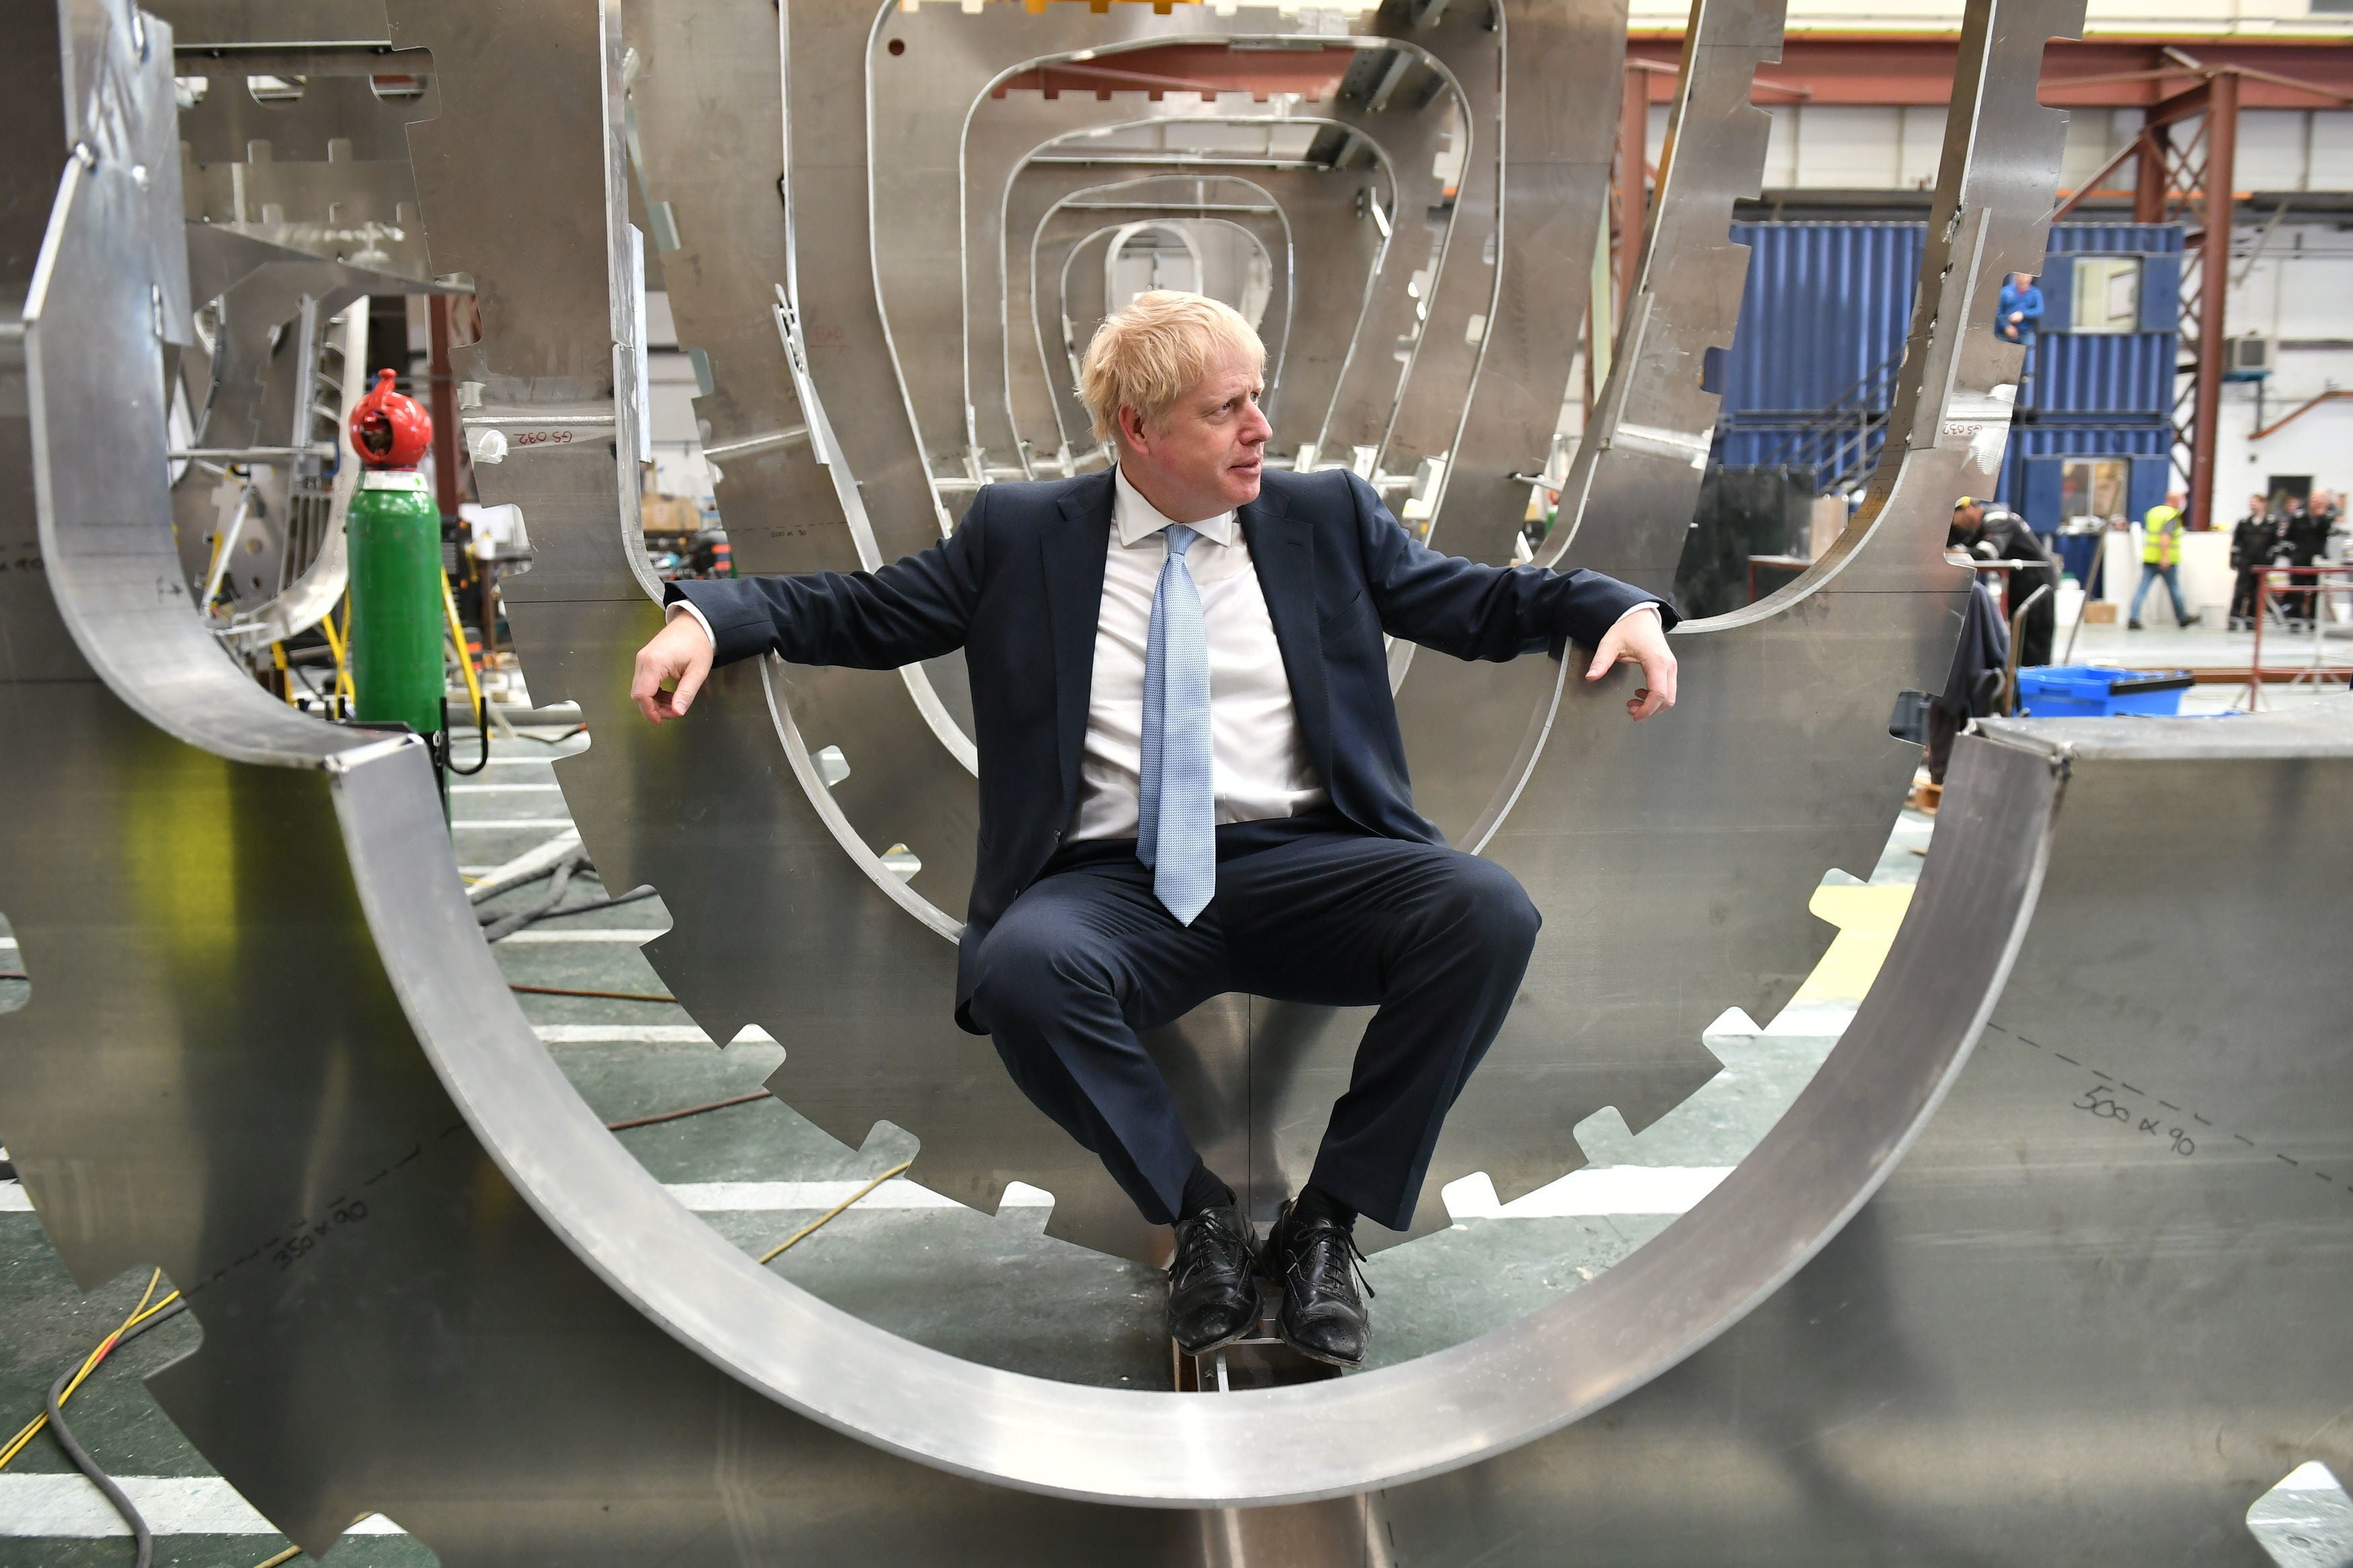 Boris Johnson sits in a boat under construction at the Venture Quay boatyard during a visit to the Isle of Wight on June 27, 2019